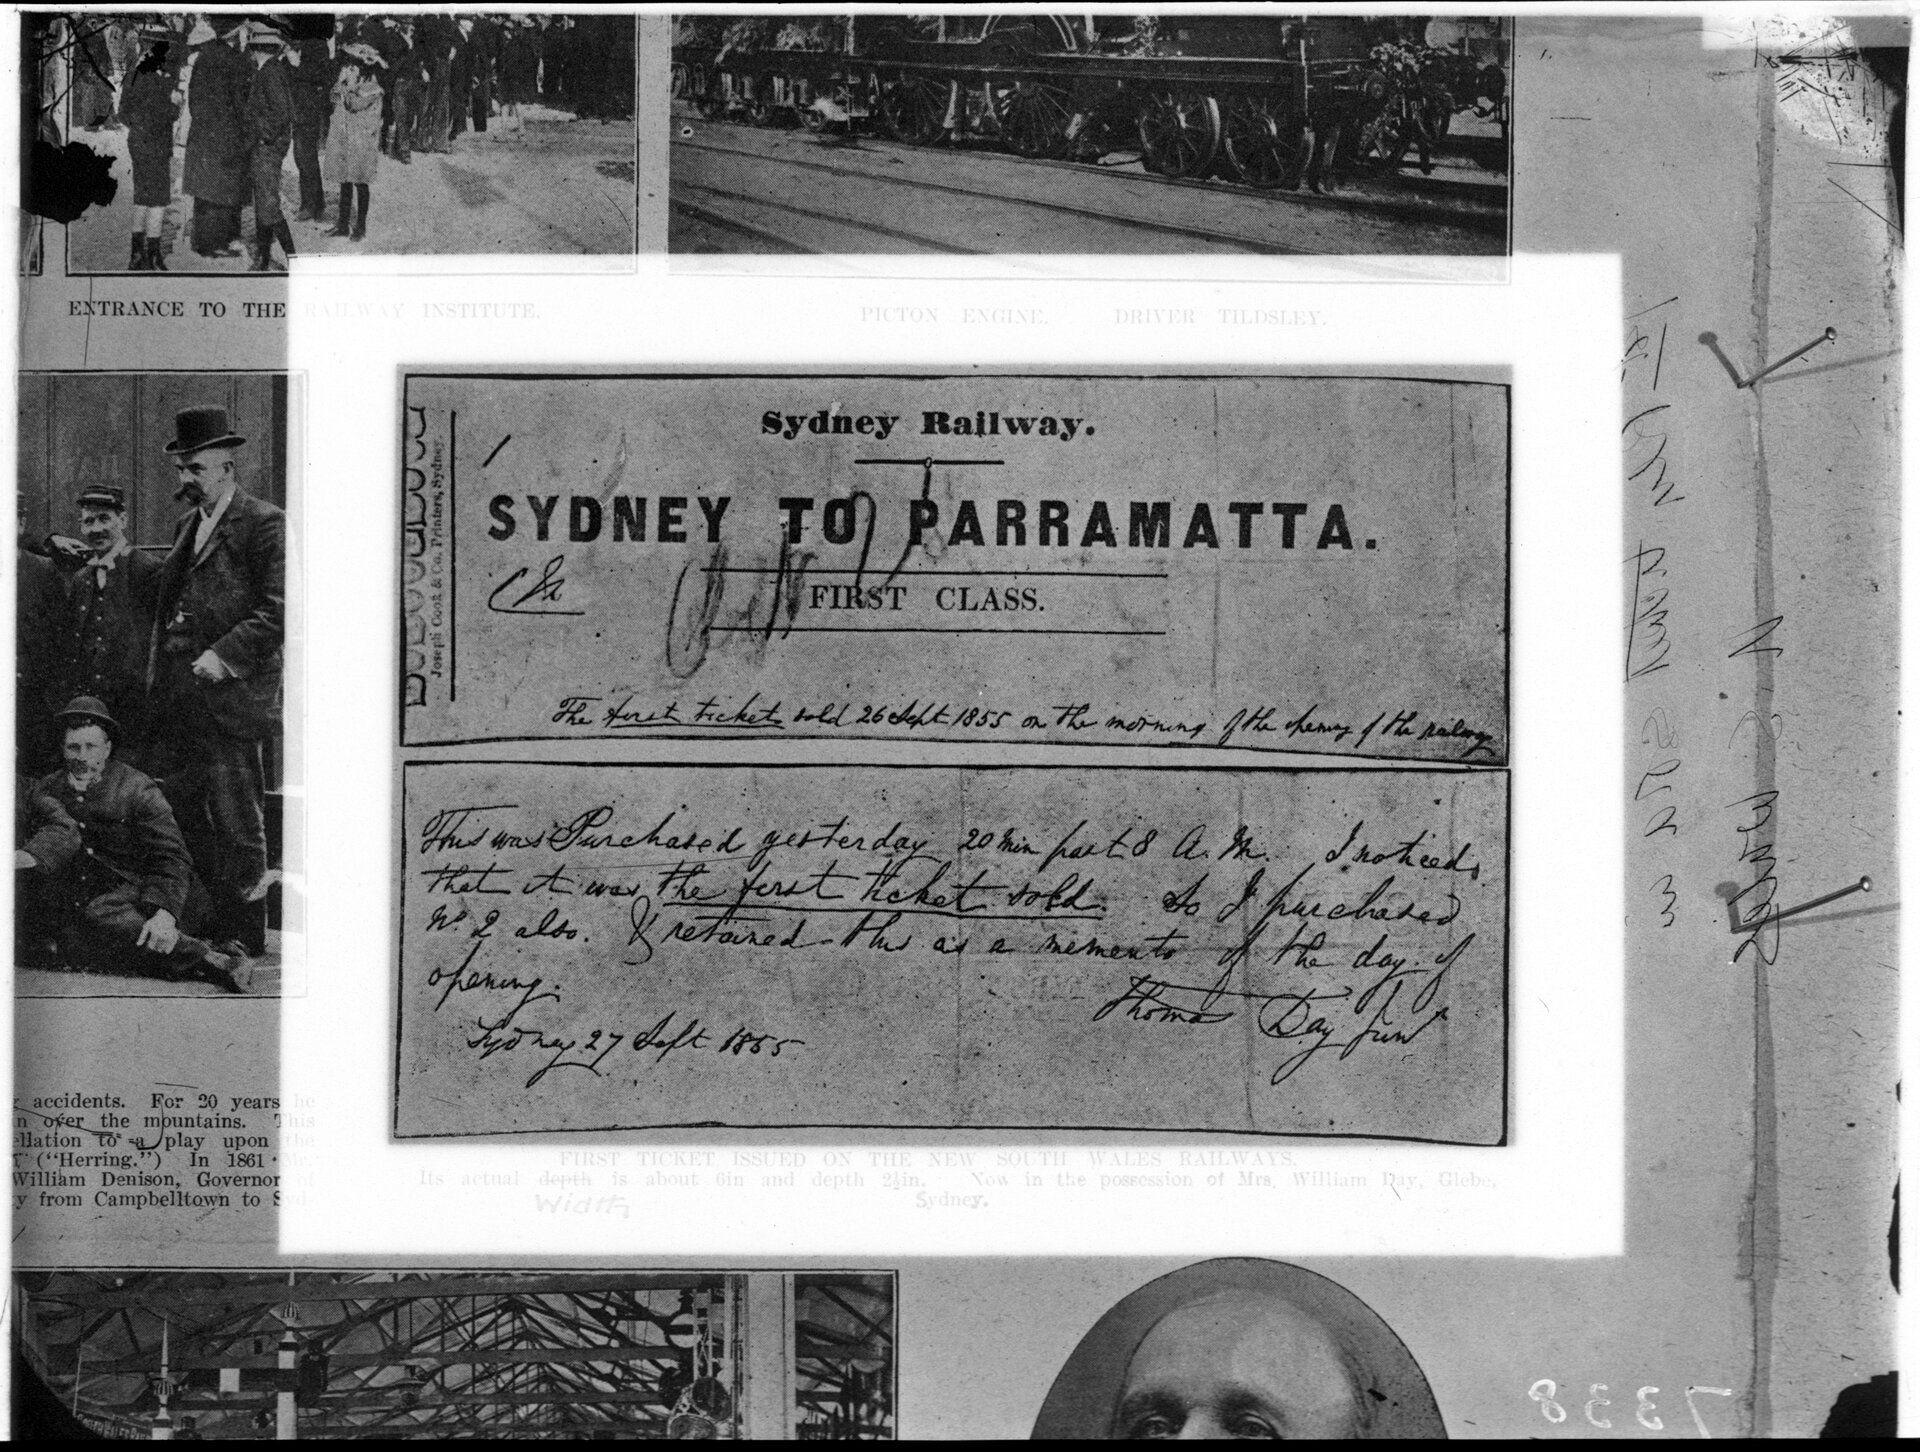 Copy of the first ticket issued on the Sydney to Parramatta line